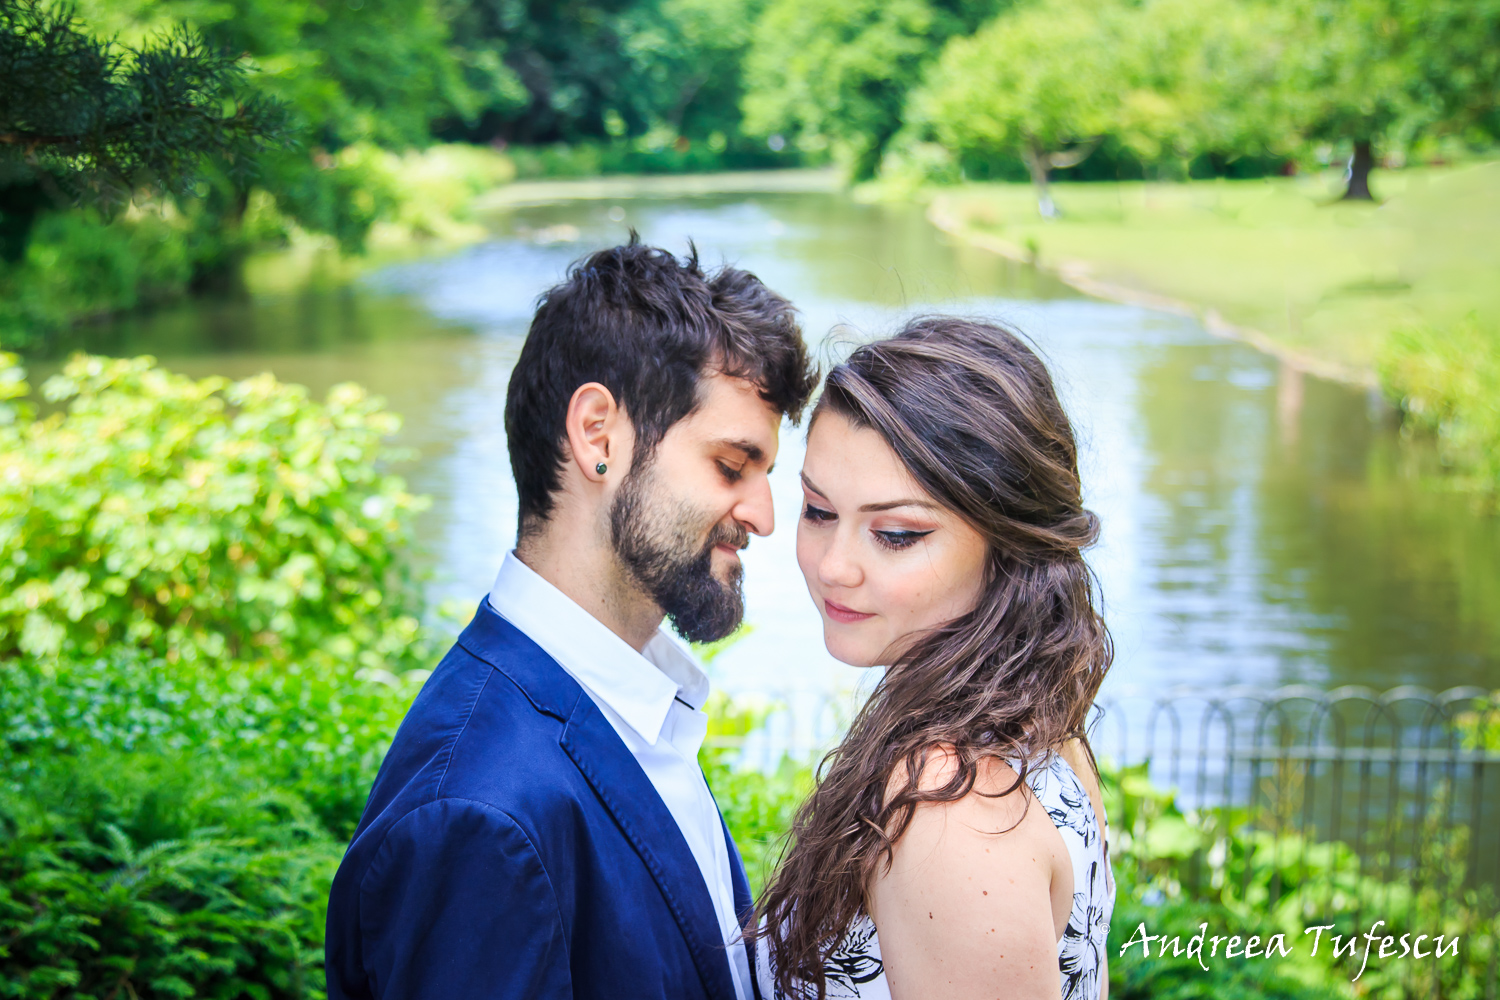  Wedding and Engagement Photography by Andreea Tufescu - L & D Engagement - PreWedding Photoshoot West London Chiswick 